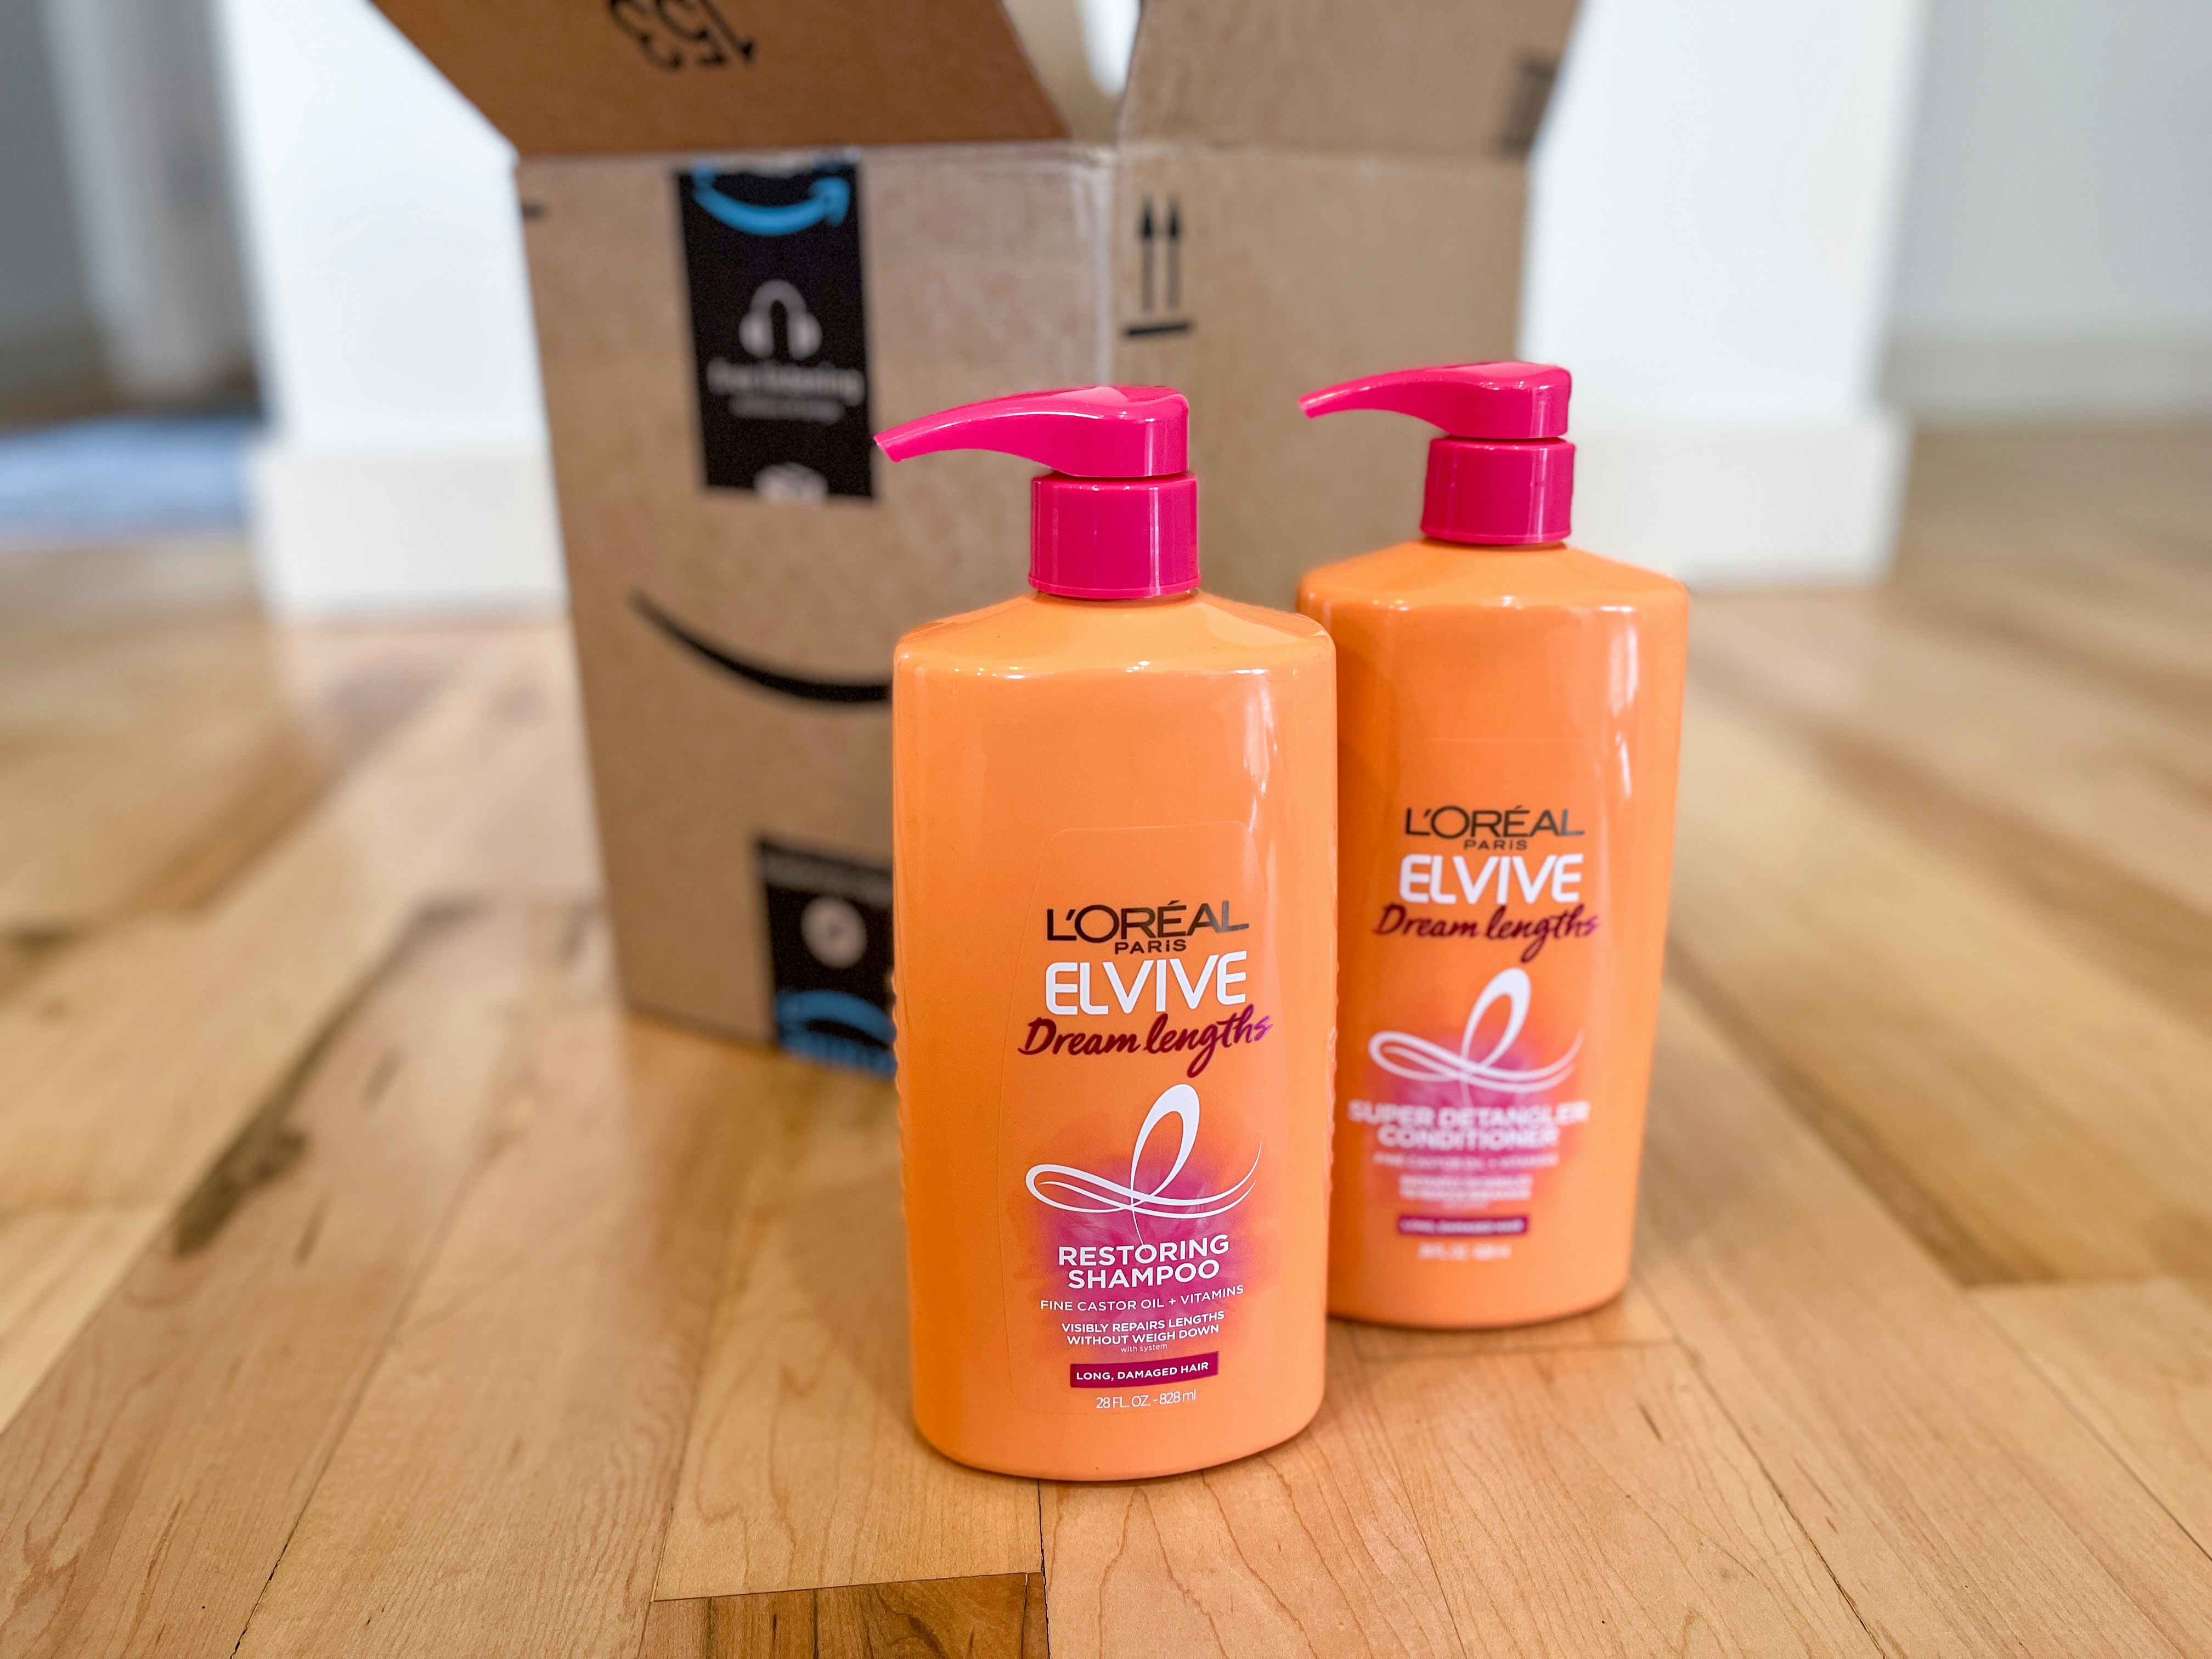 two bottles of loreal paris elvive shampoo and conditioner placed on the floor in front of an amazon prime box